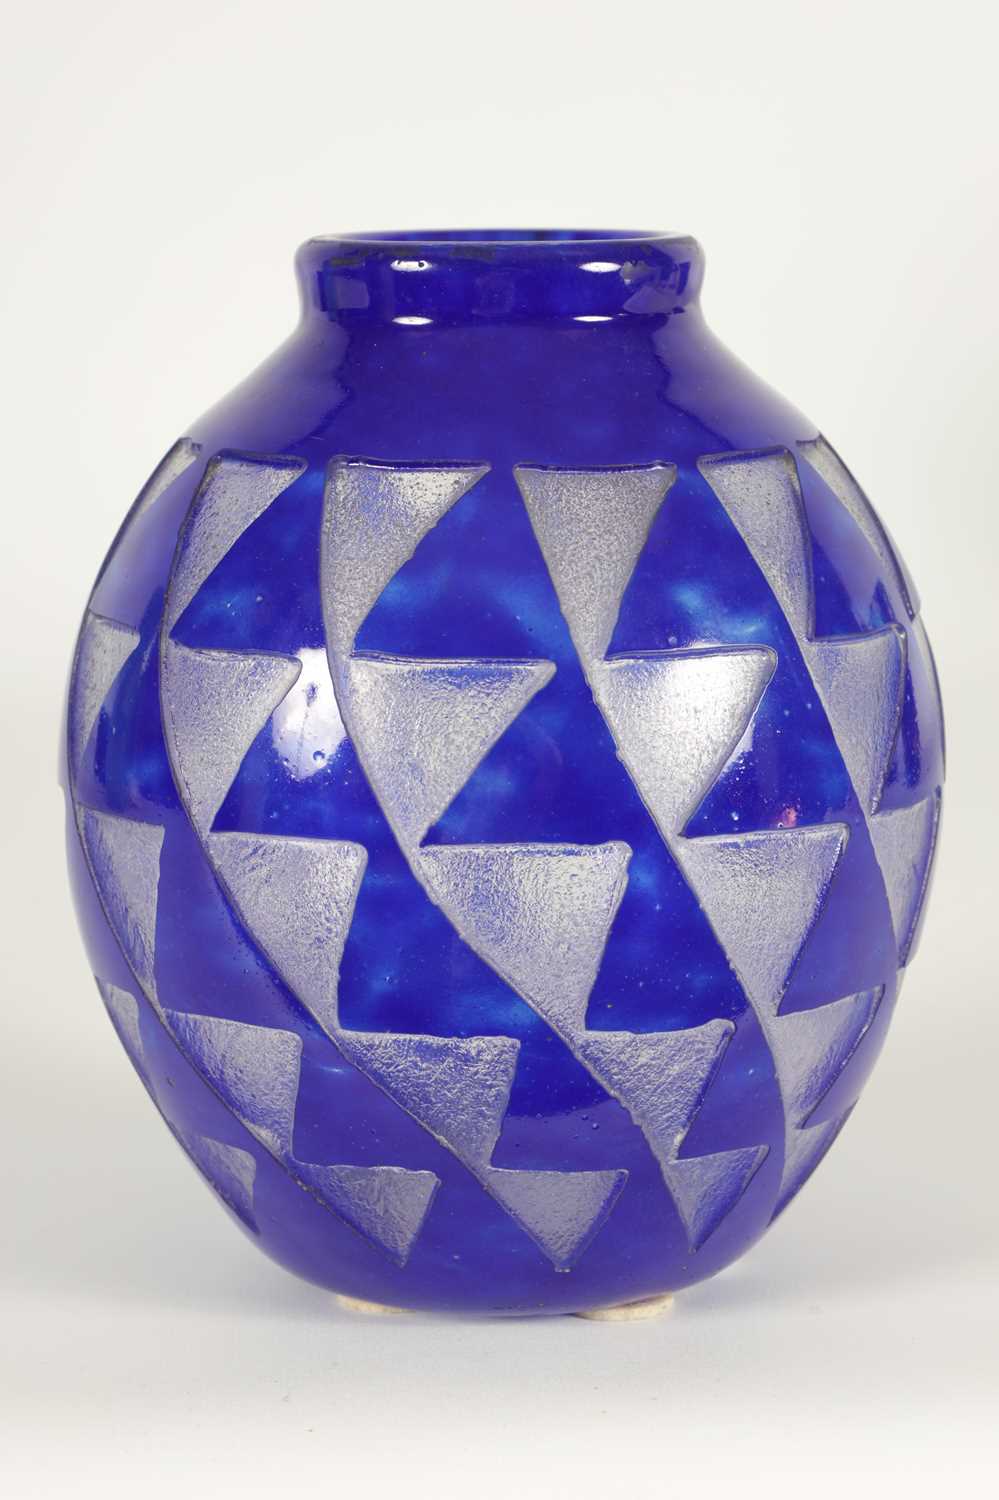 DAVID GUERON FOR DEGUE. A 1930'S FRENCH ART DECO GLASS VASE - Image 2 of 9